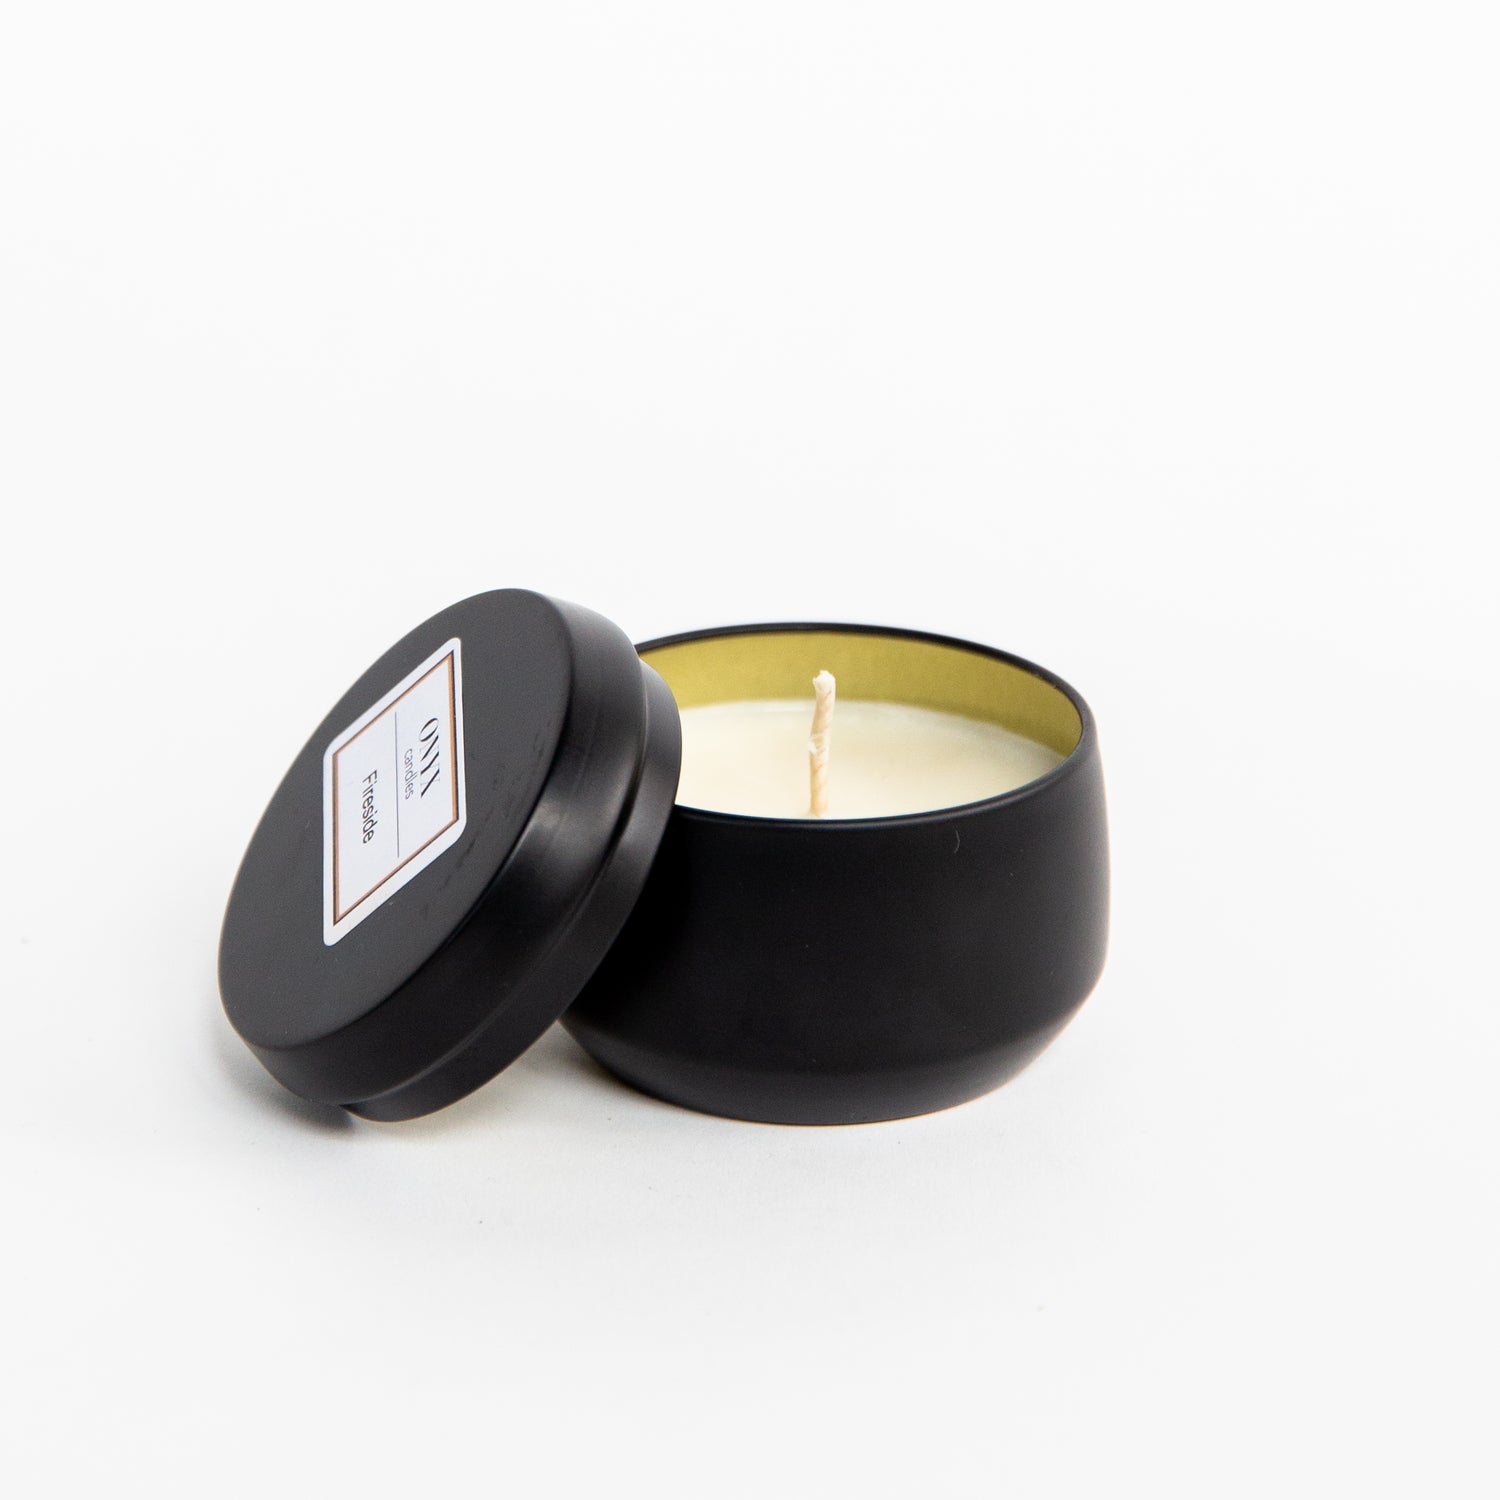 Pictured is the 4 oz matte black tin candle in the scent Fireside